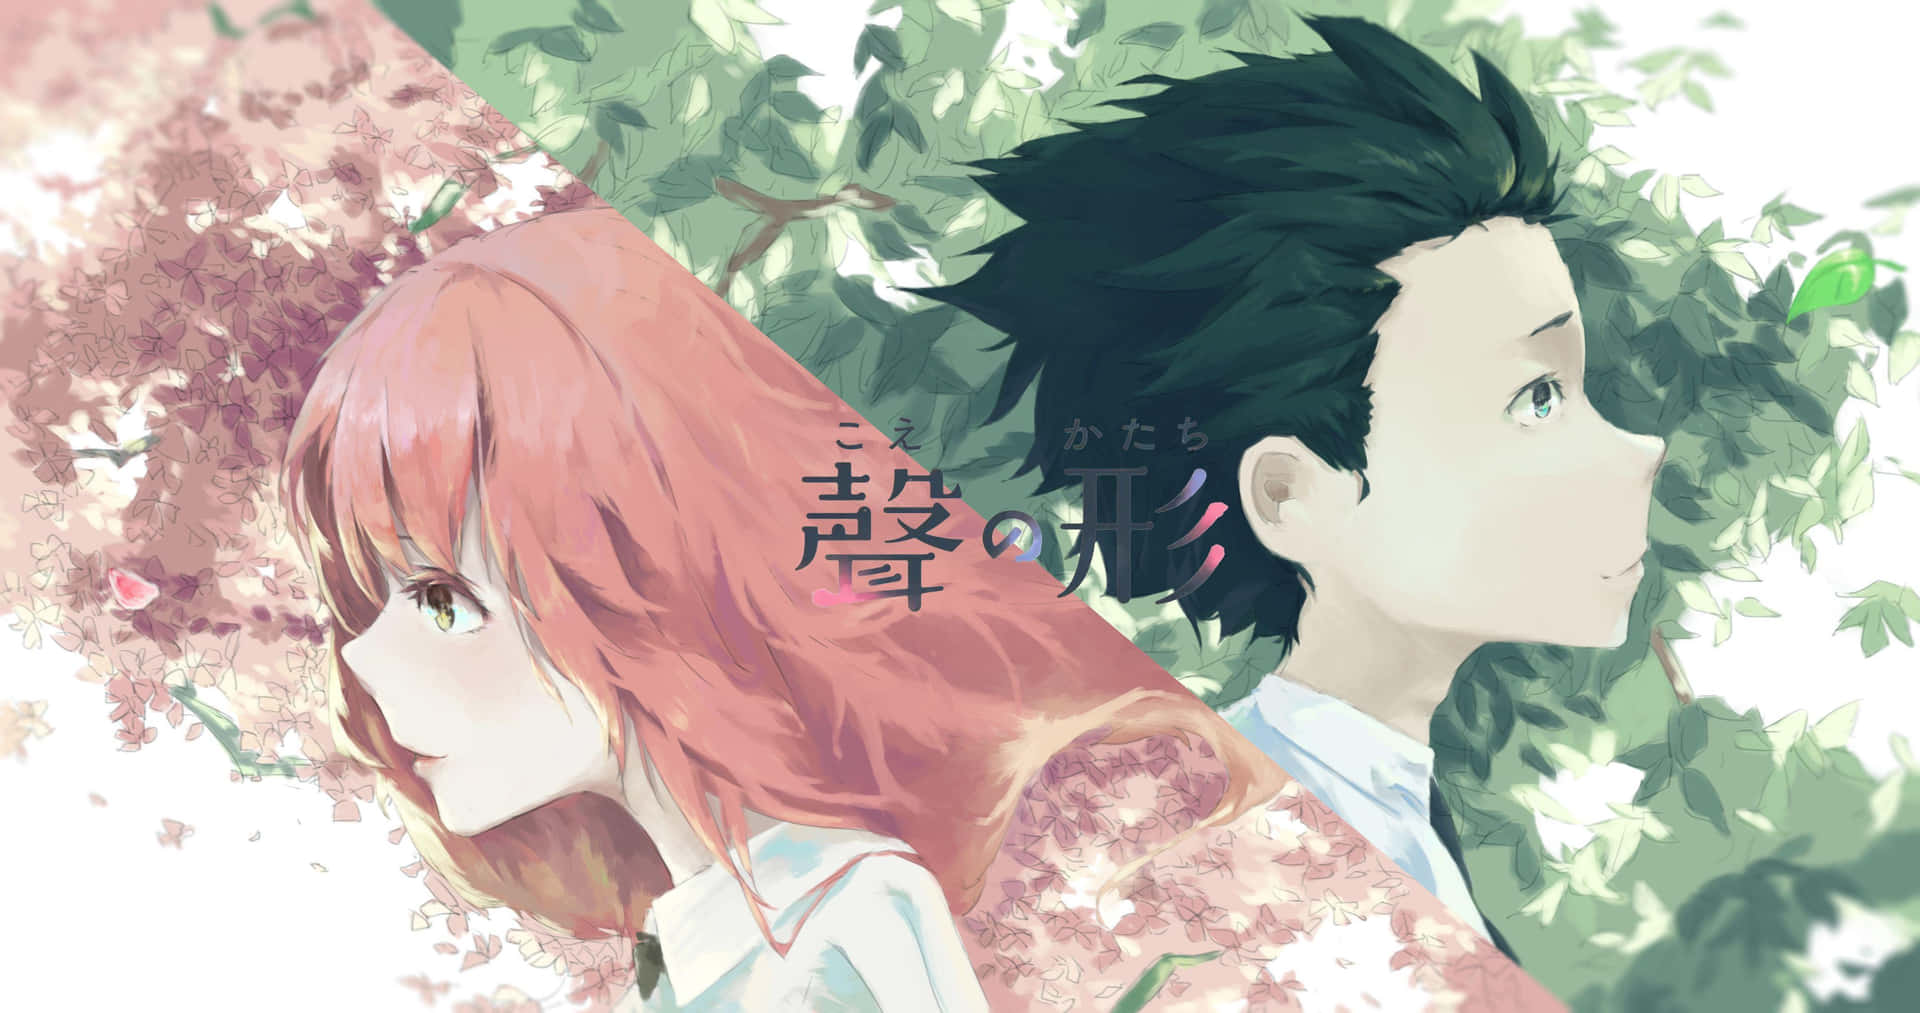 A Silent Voice - The Journey